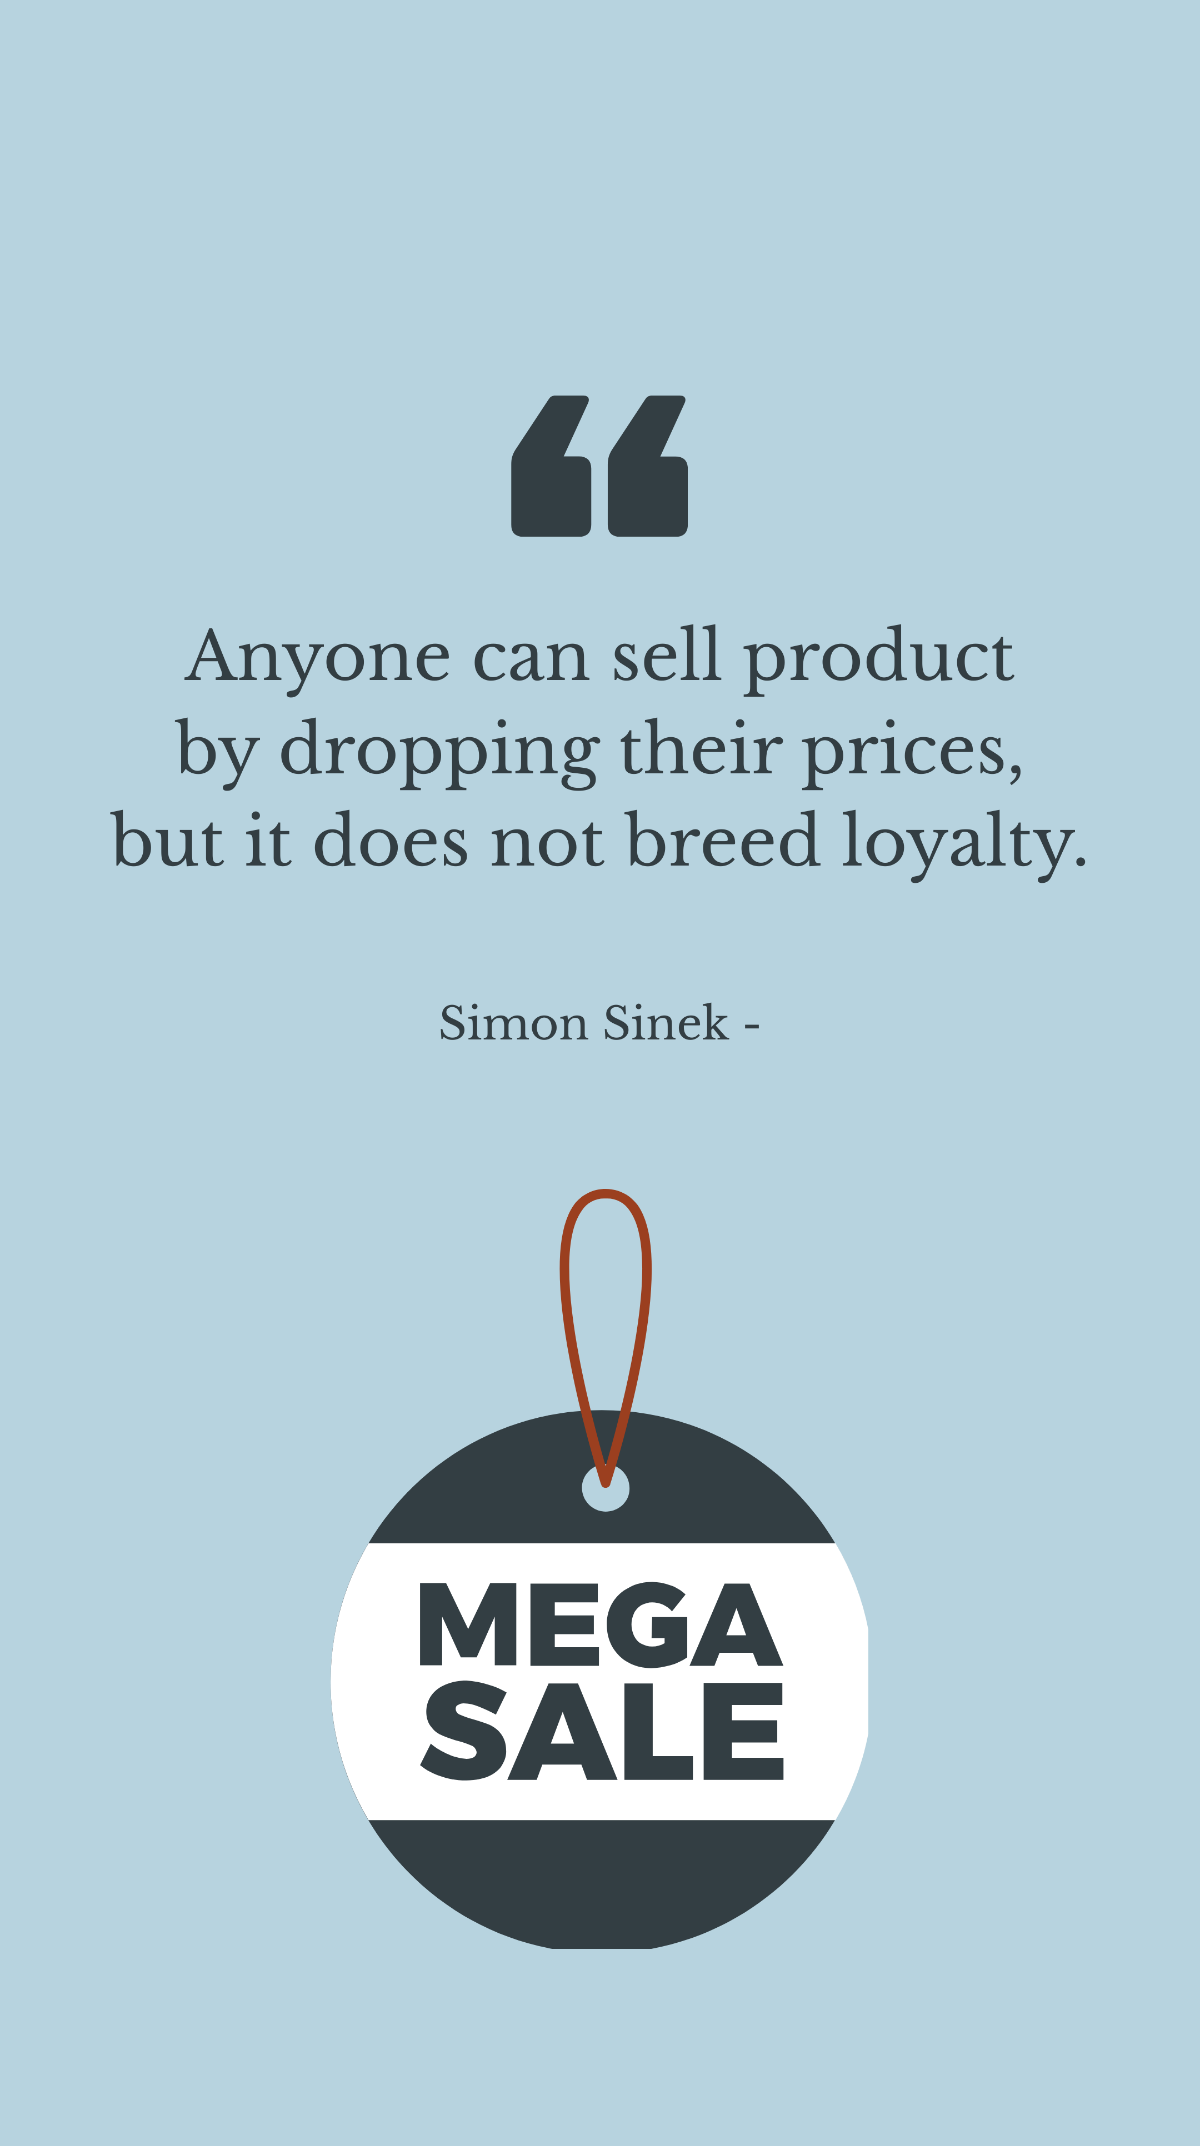 Simon Sinek - Anyone can sell product by dropping their prices, but it does not breed loyalty. Template